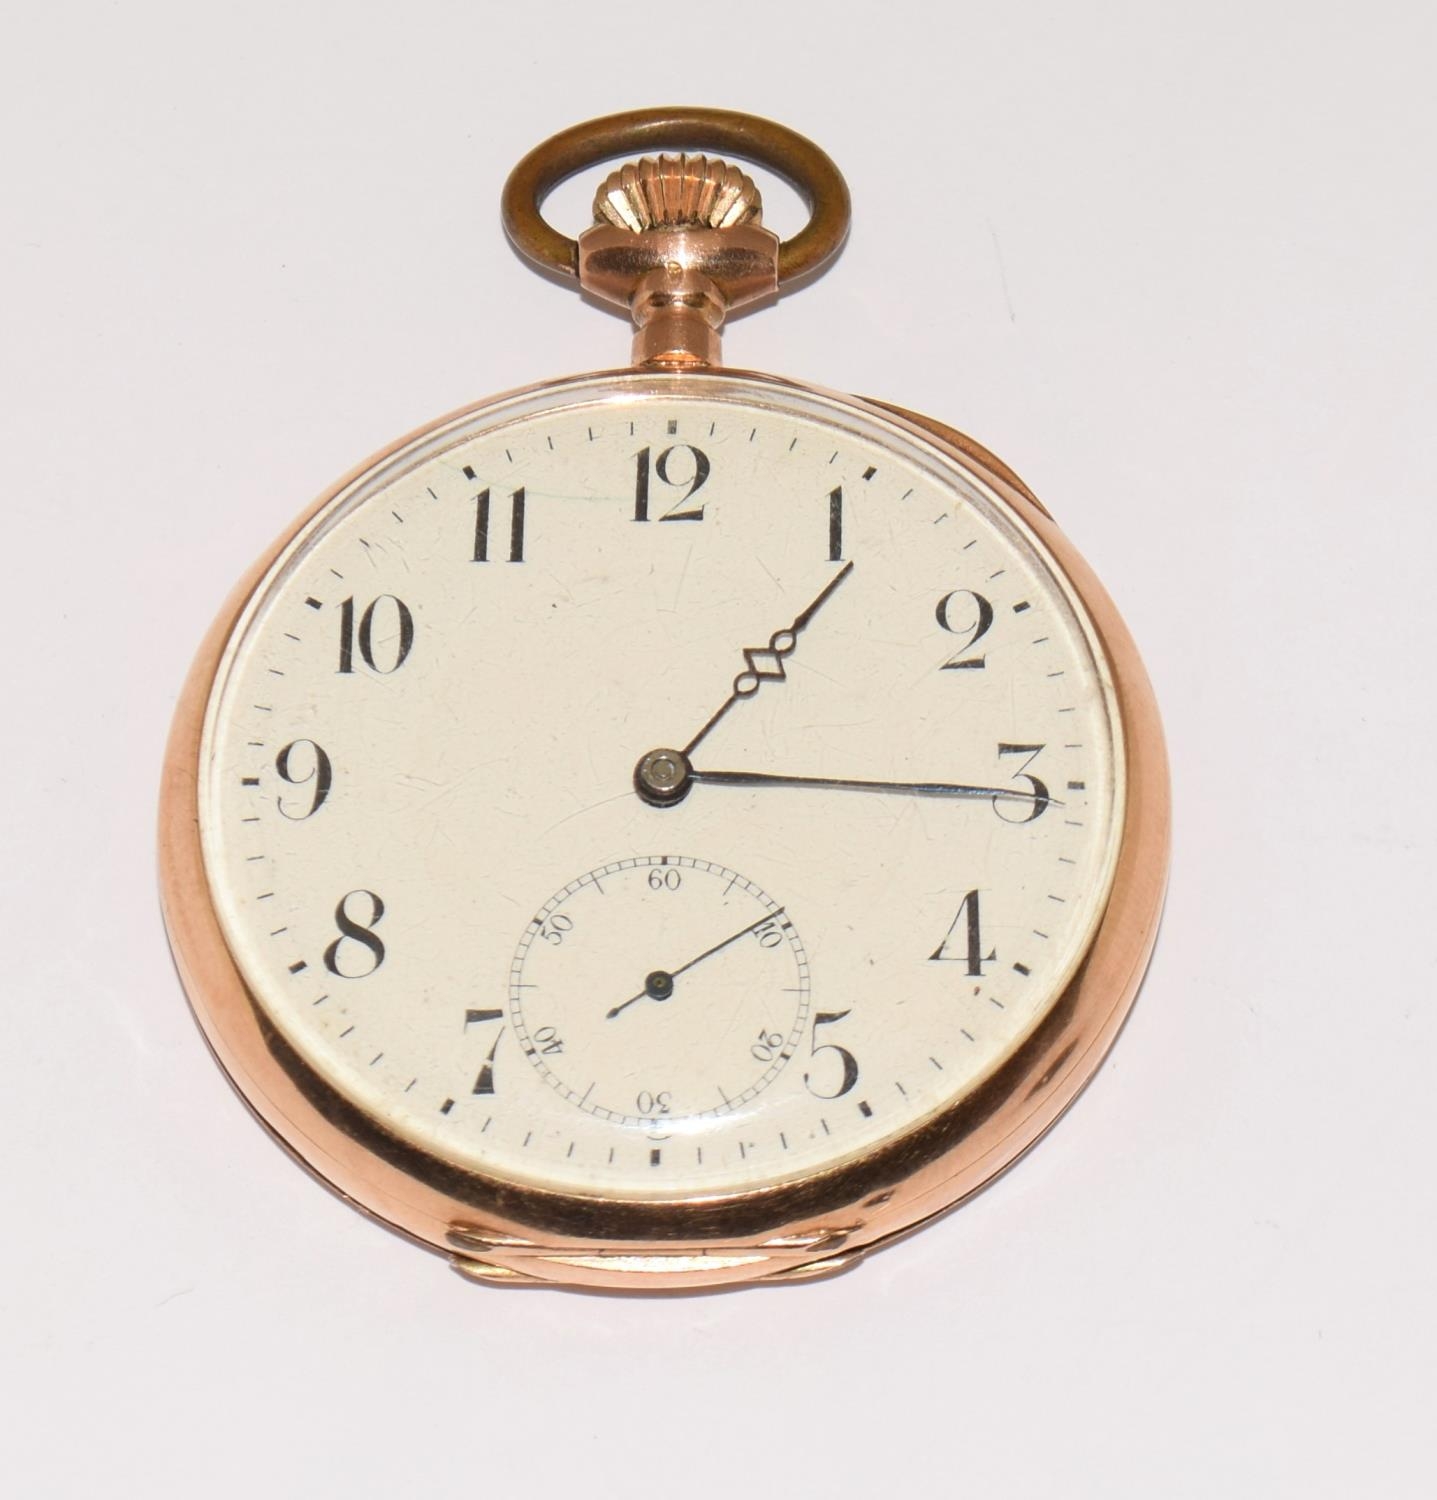 14ct gold open face pocket watch with subsidiary dial working when catalogued 63g